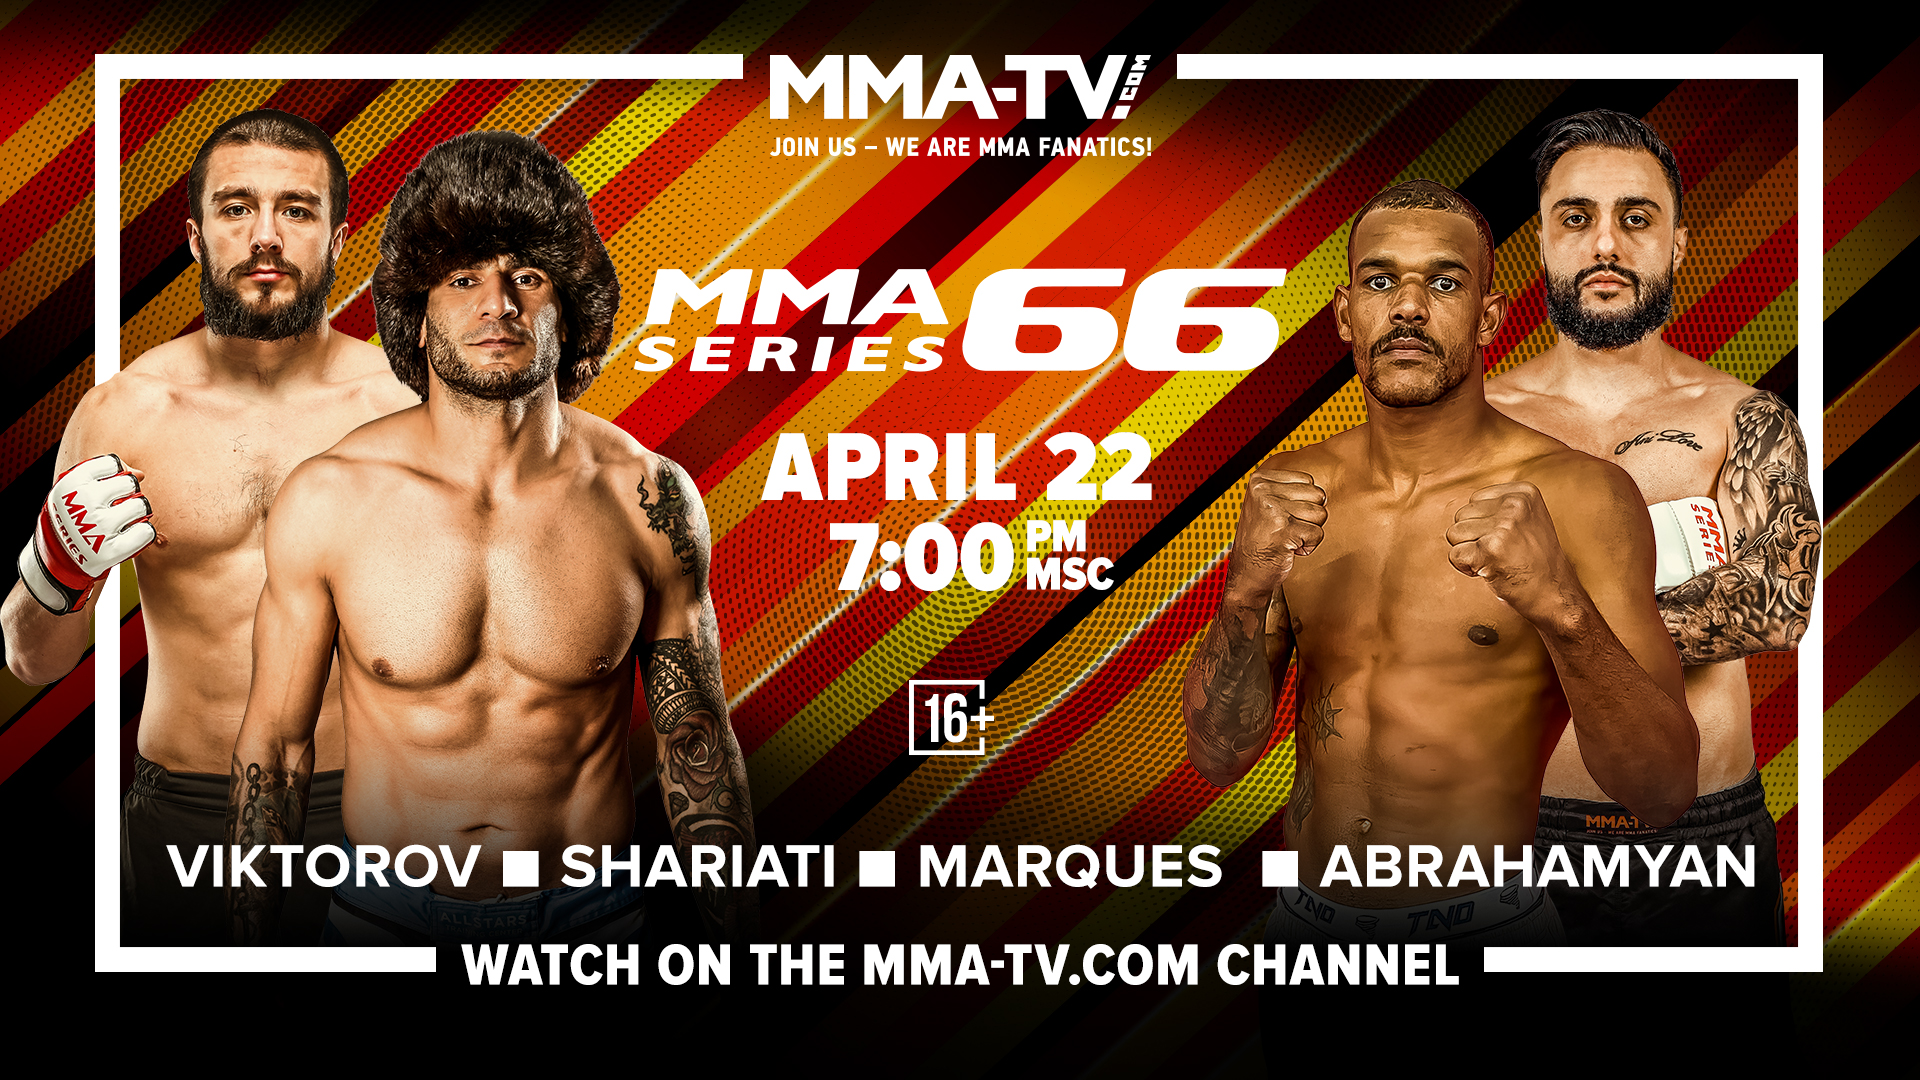 Marques versus Shariati in main fight of MMA Series-66 MMA Series official website